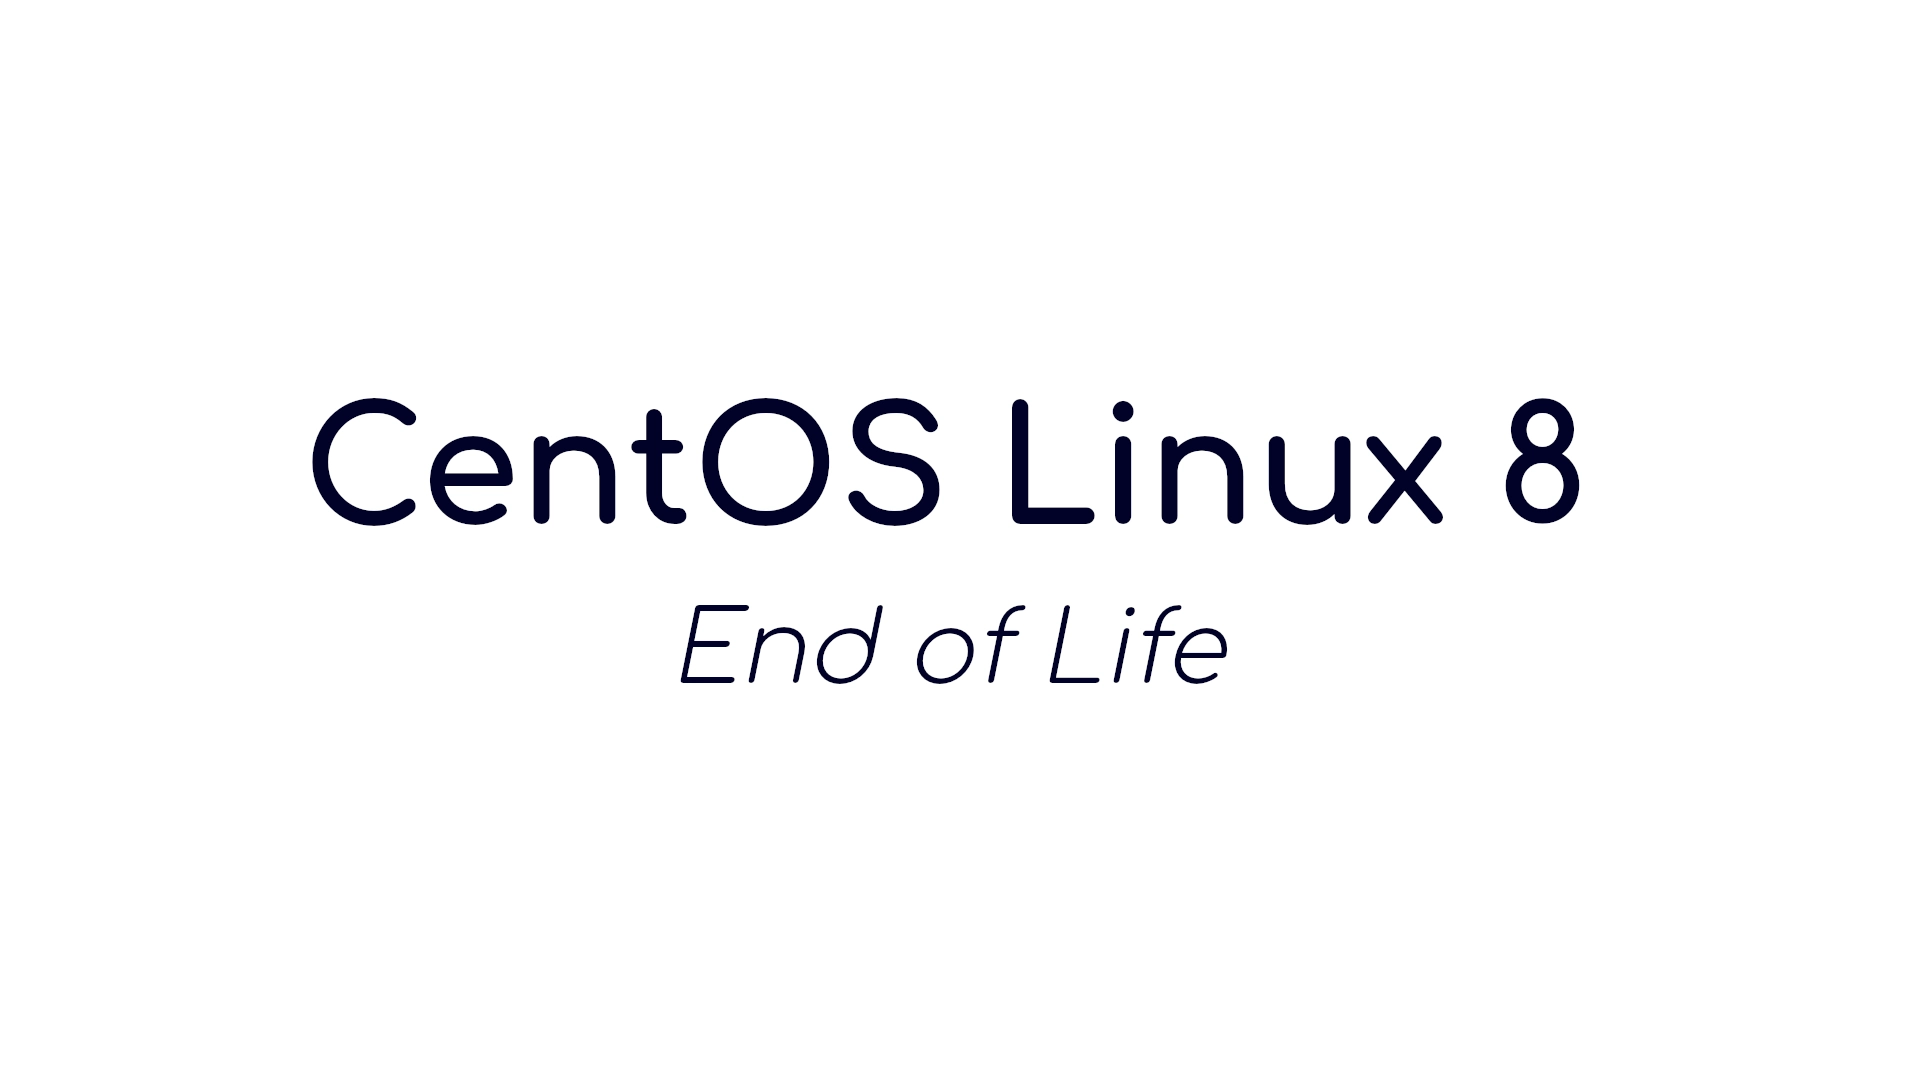 CentOS Linux 8 Reached End of Life, It’s Time to Migrate to an Alternative OS